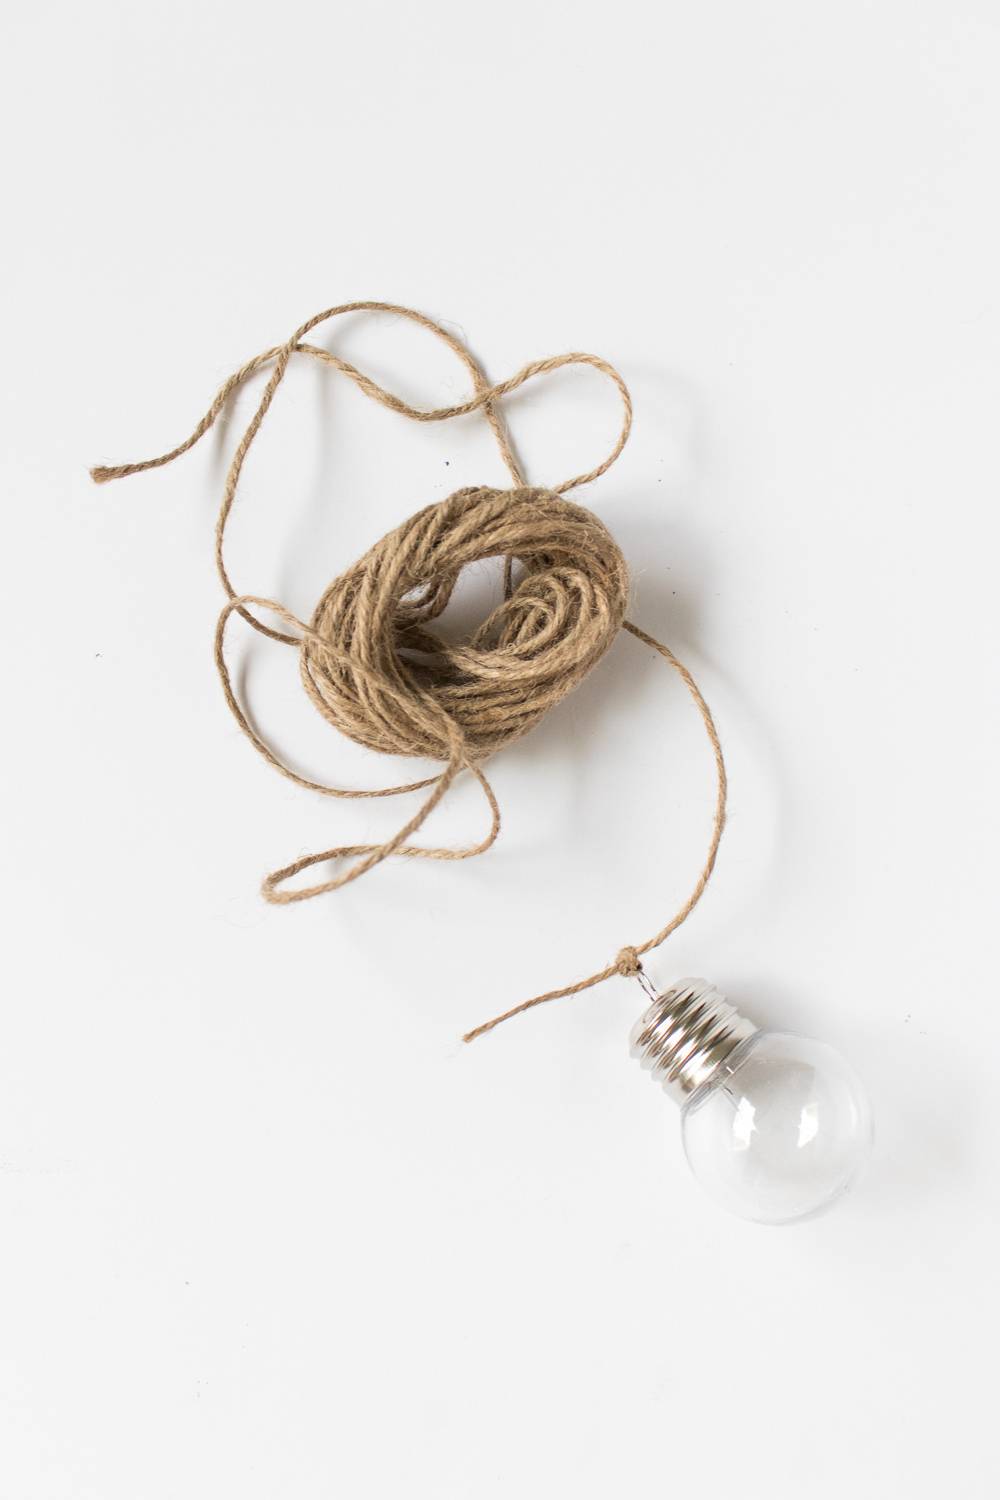 A small ball of brown twine sits on a table next to a small lightbulb.